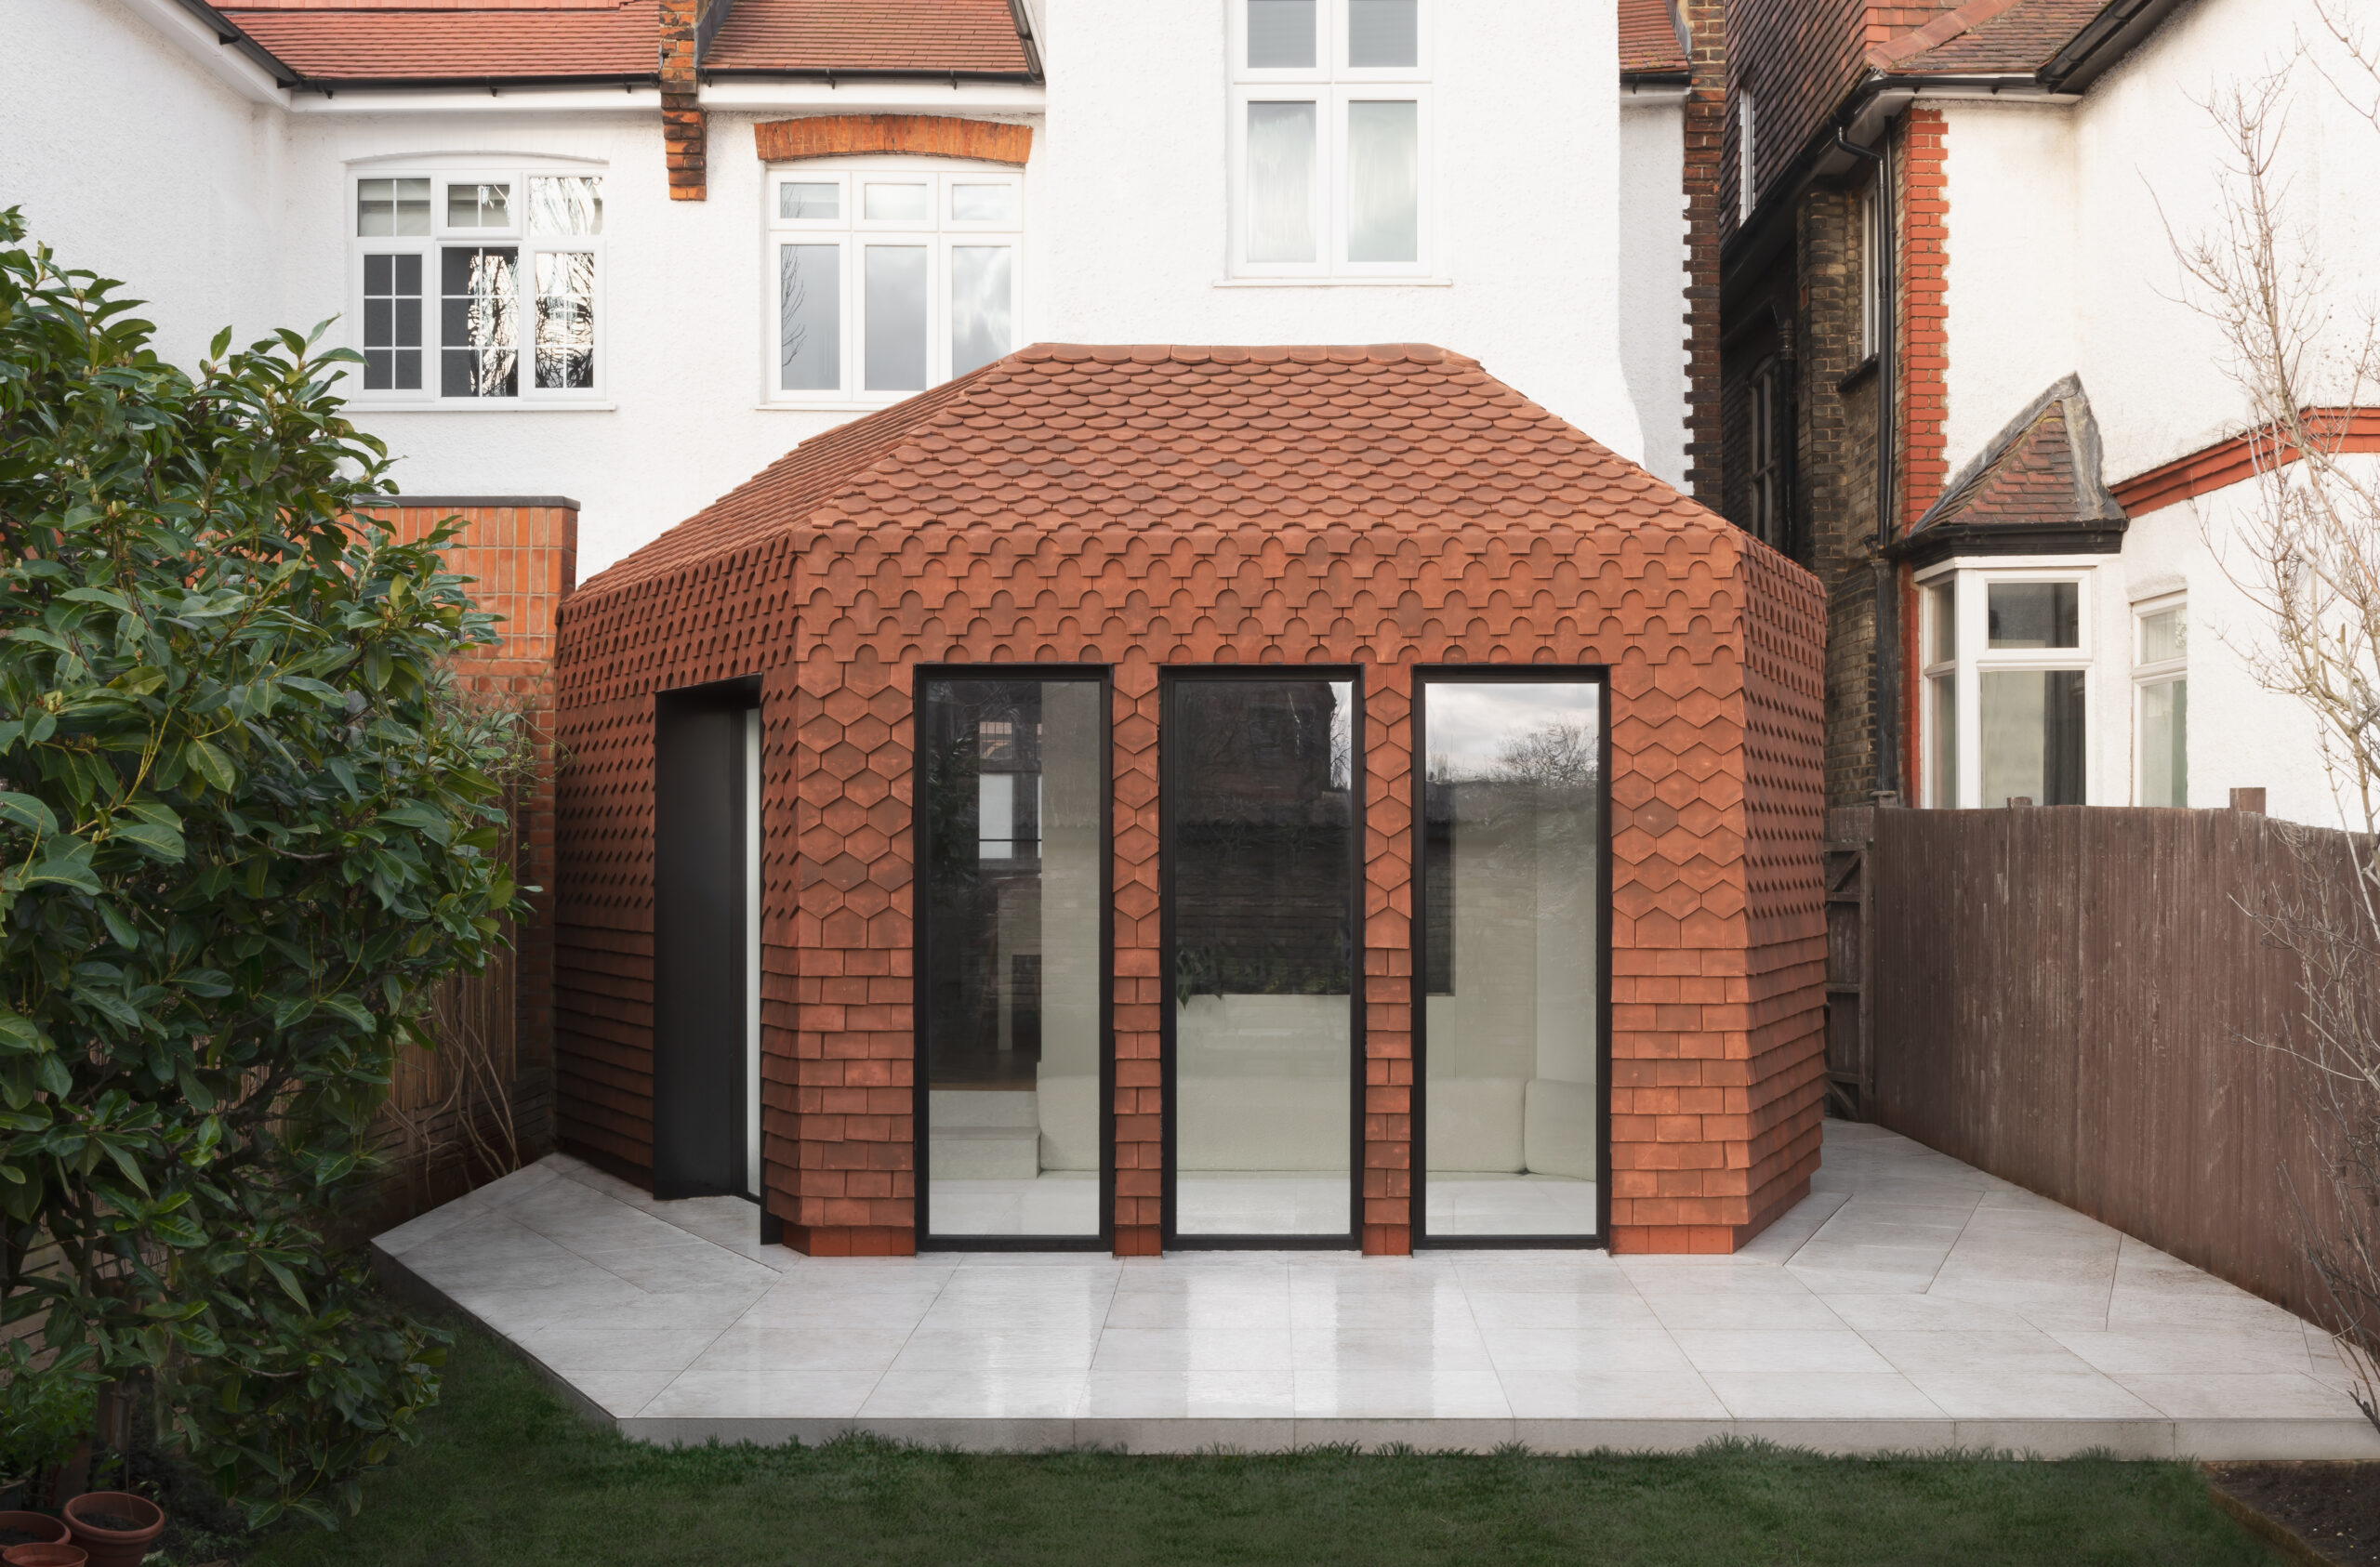 Contemporary style extension with red clay tiles on the facade